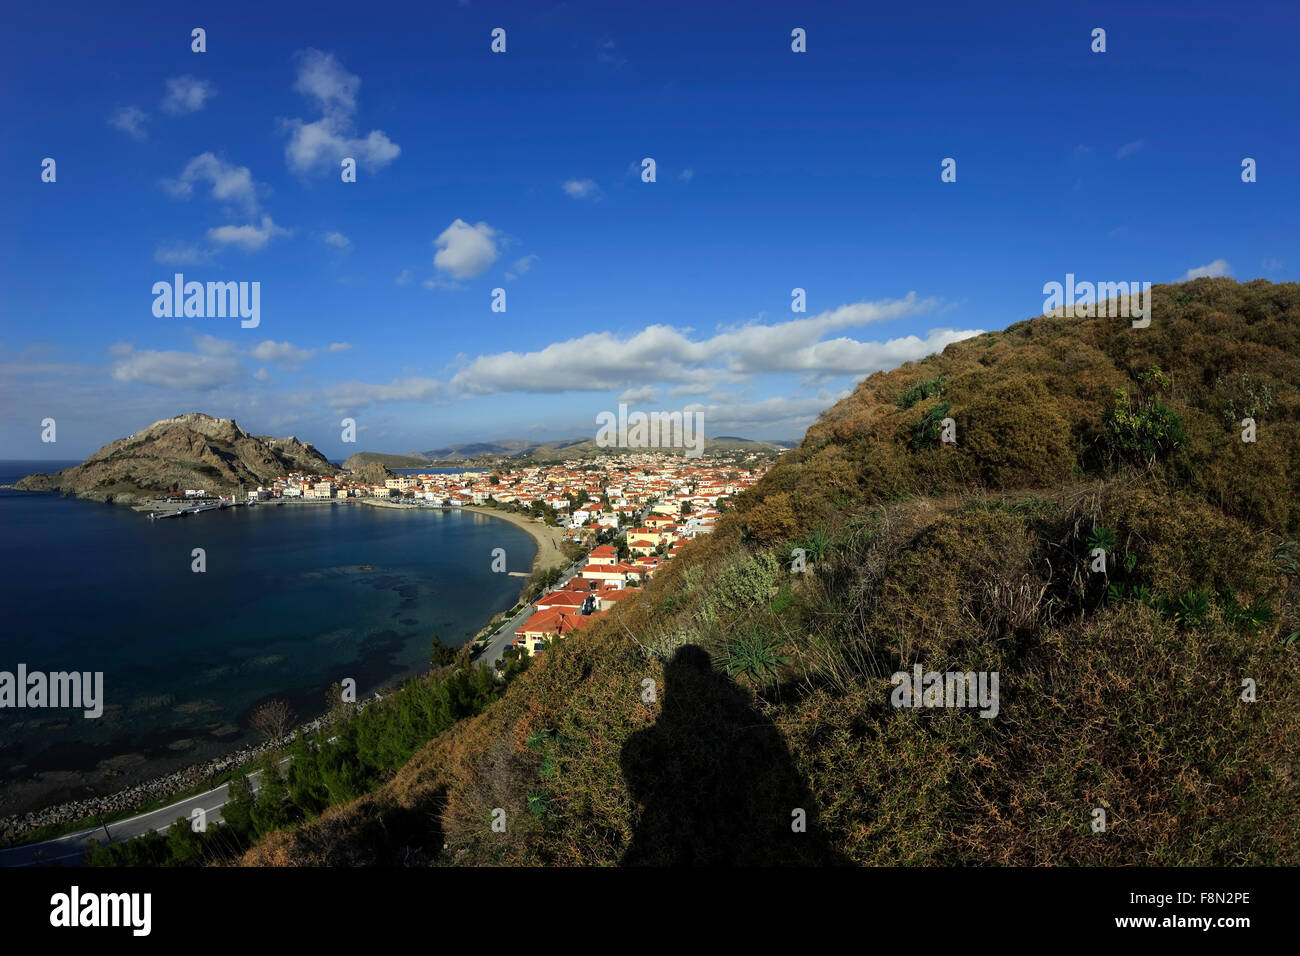 Wide angle view of Myrina city bay and sp. Sarcopoterium spinosum bushes on hillside. Lemnos or Limnos island, Greece Stock Photo